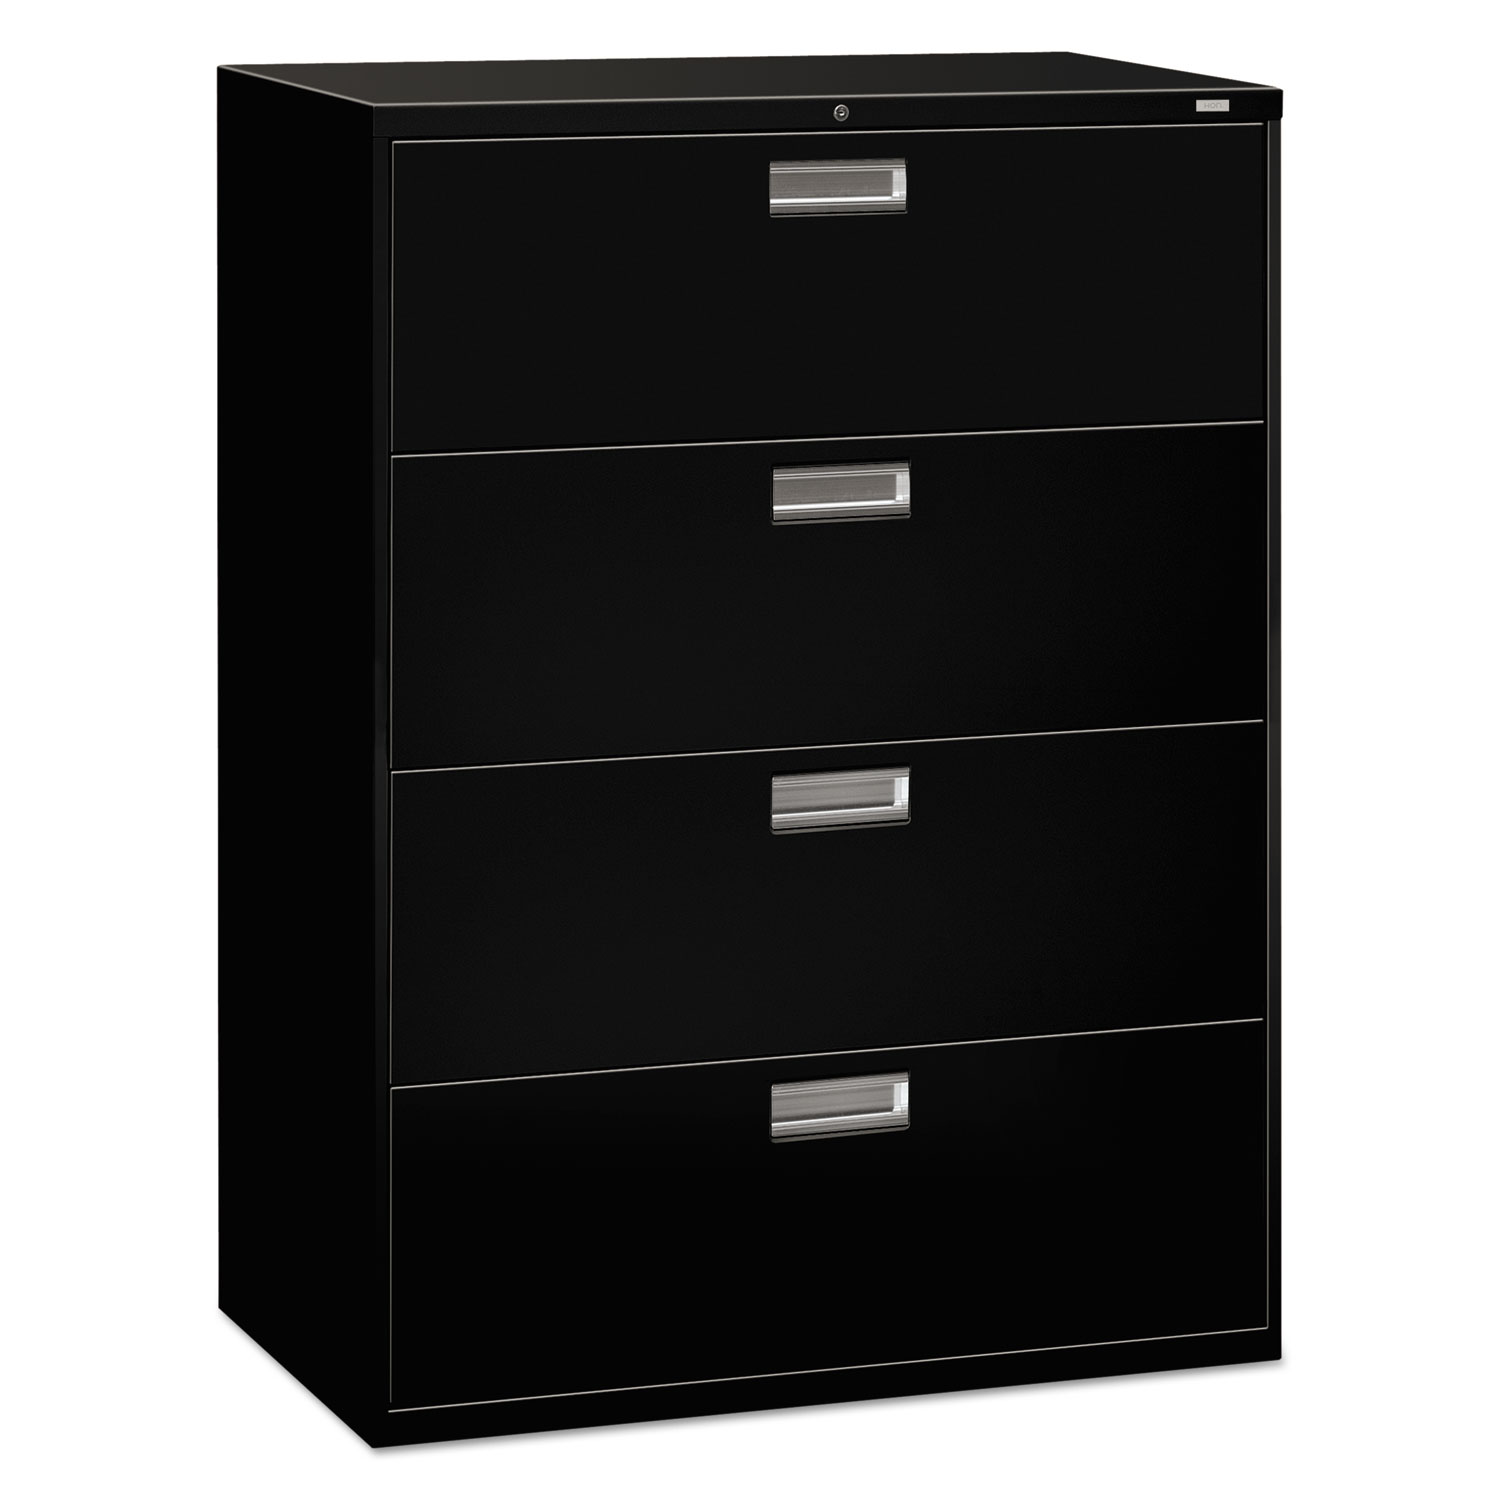 600 Series Four-Drawer Lateral File, 42w x 18d x 52 1/2h, Black